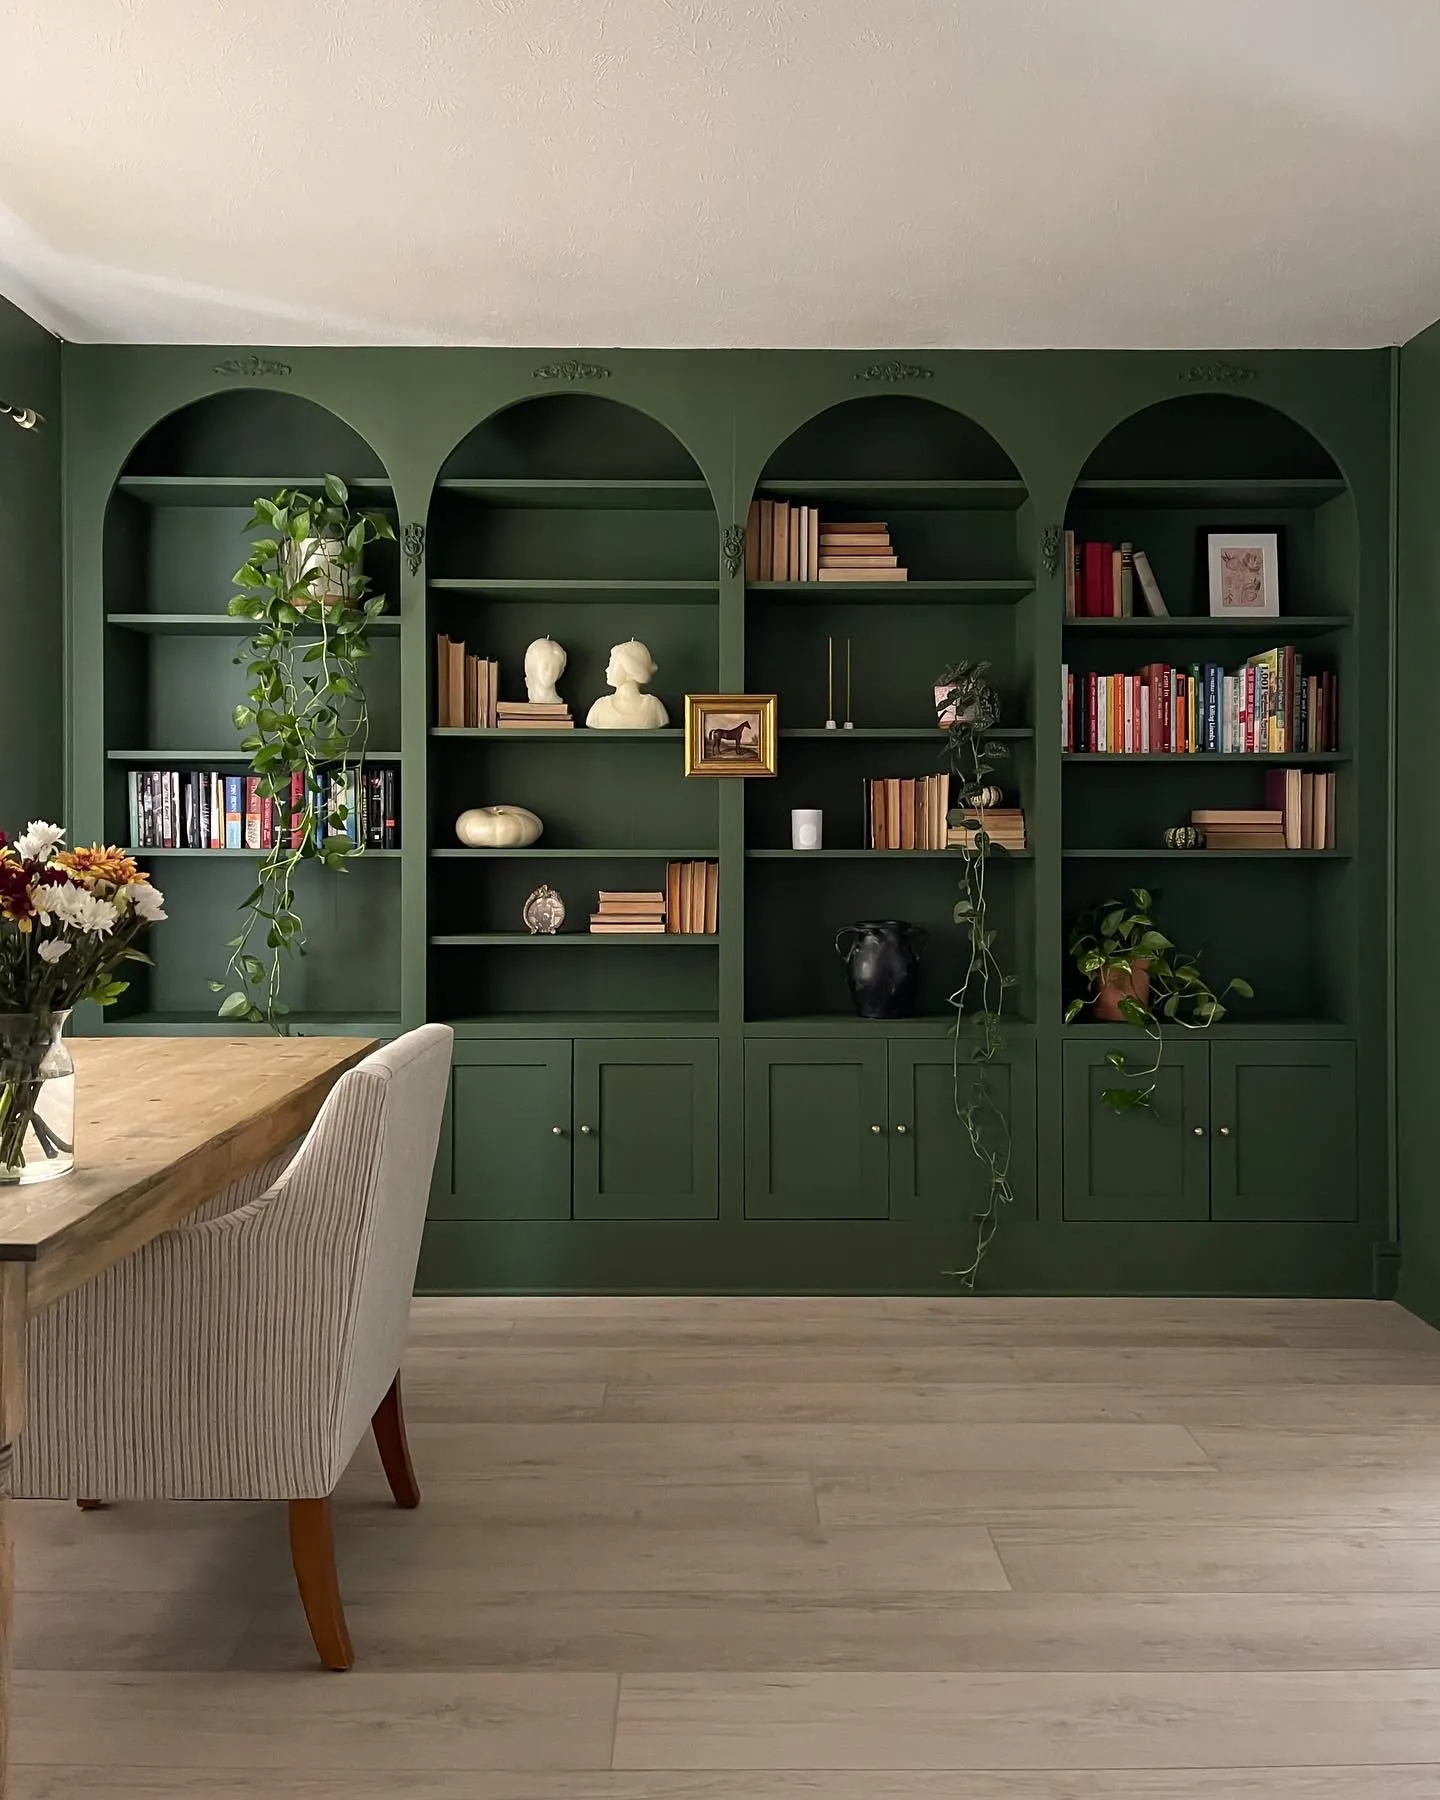 Get the perfect vintage bookcase for a
  bookworm